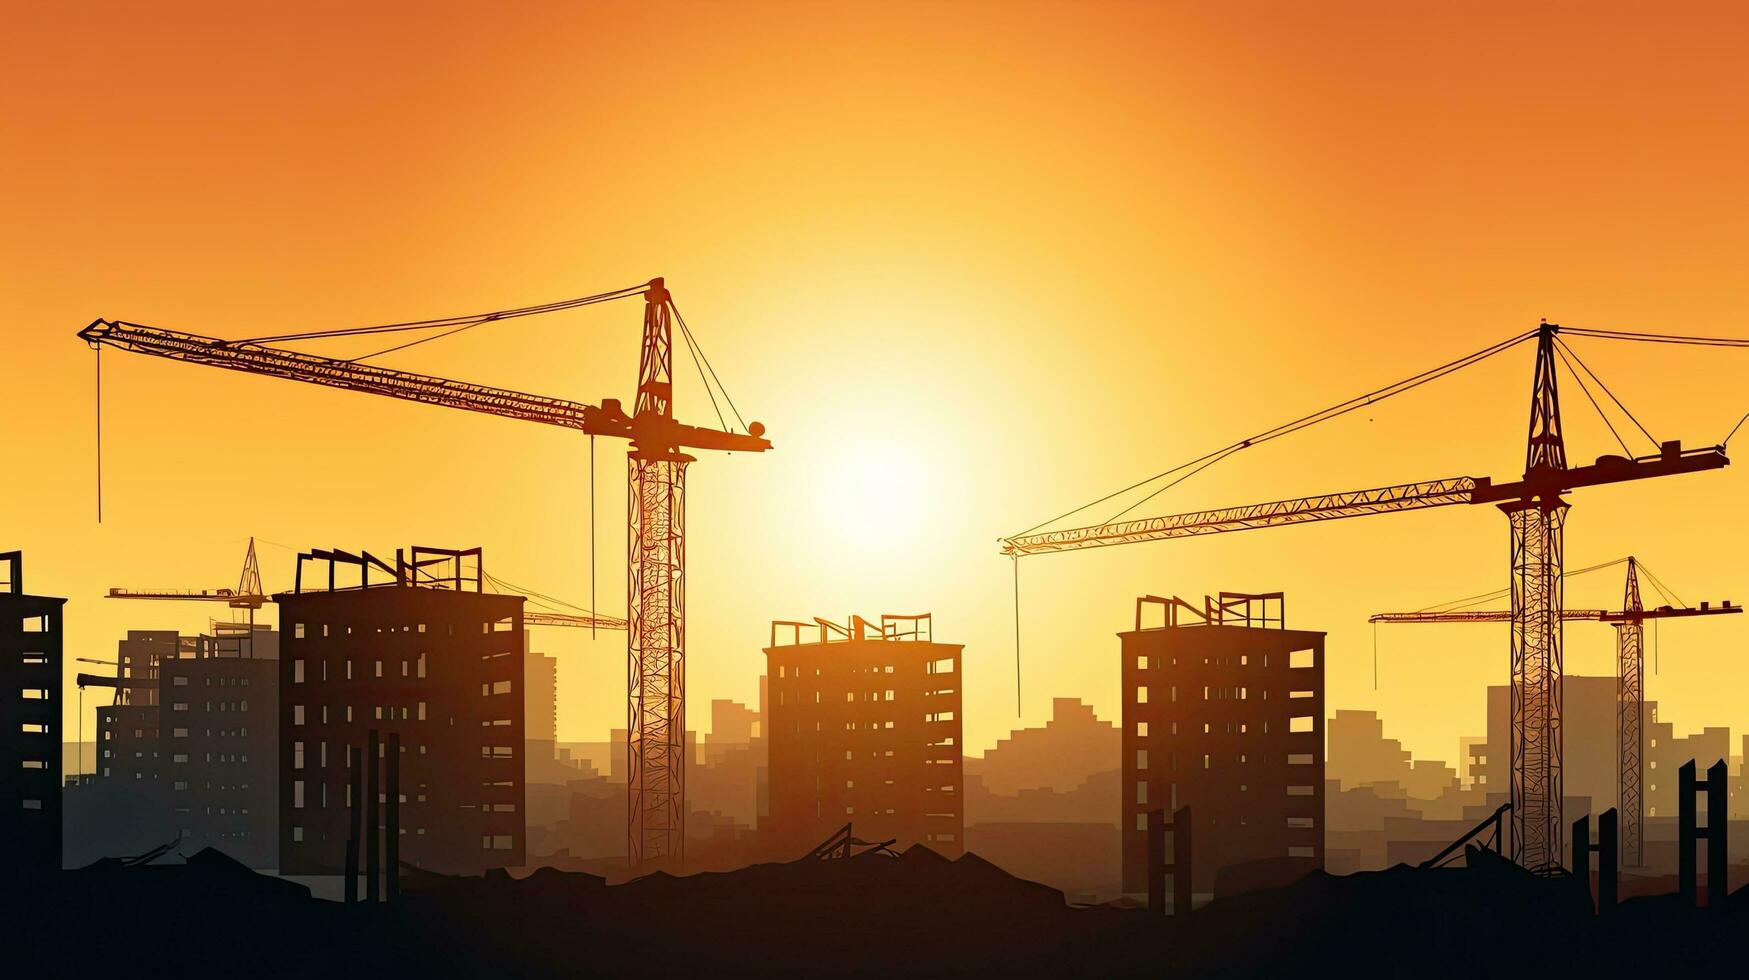 Sunrise with silhouetted cranes and buildings in industrial construction photo